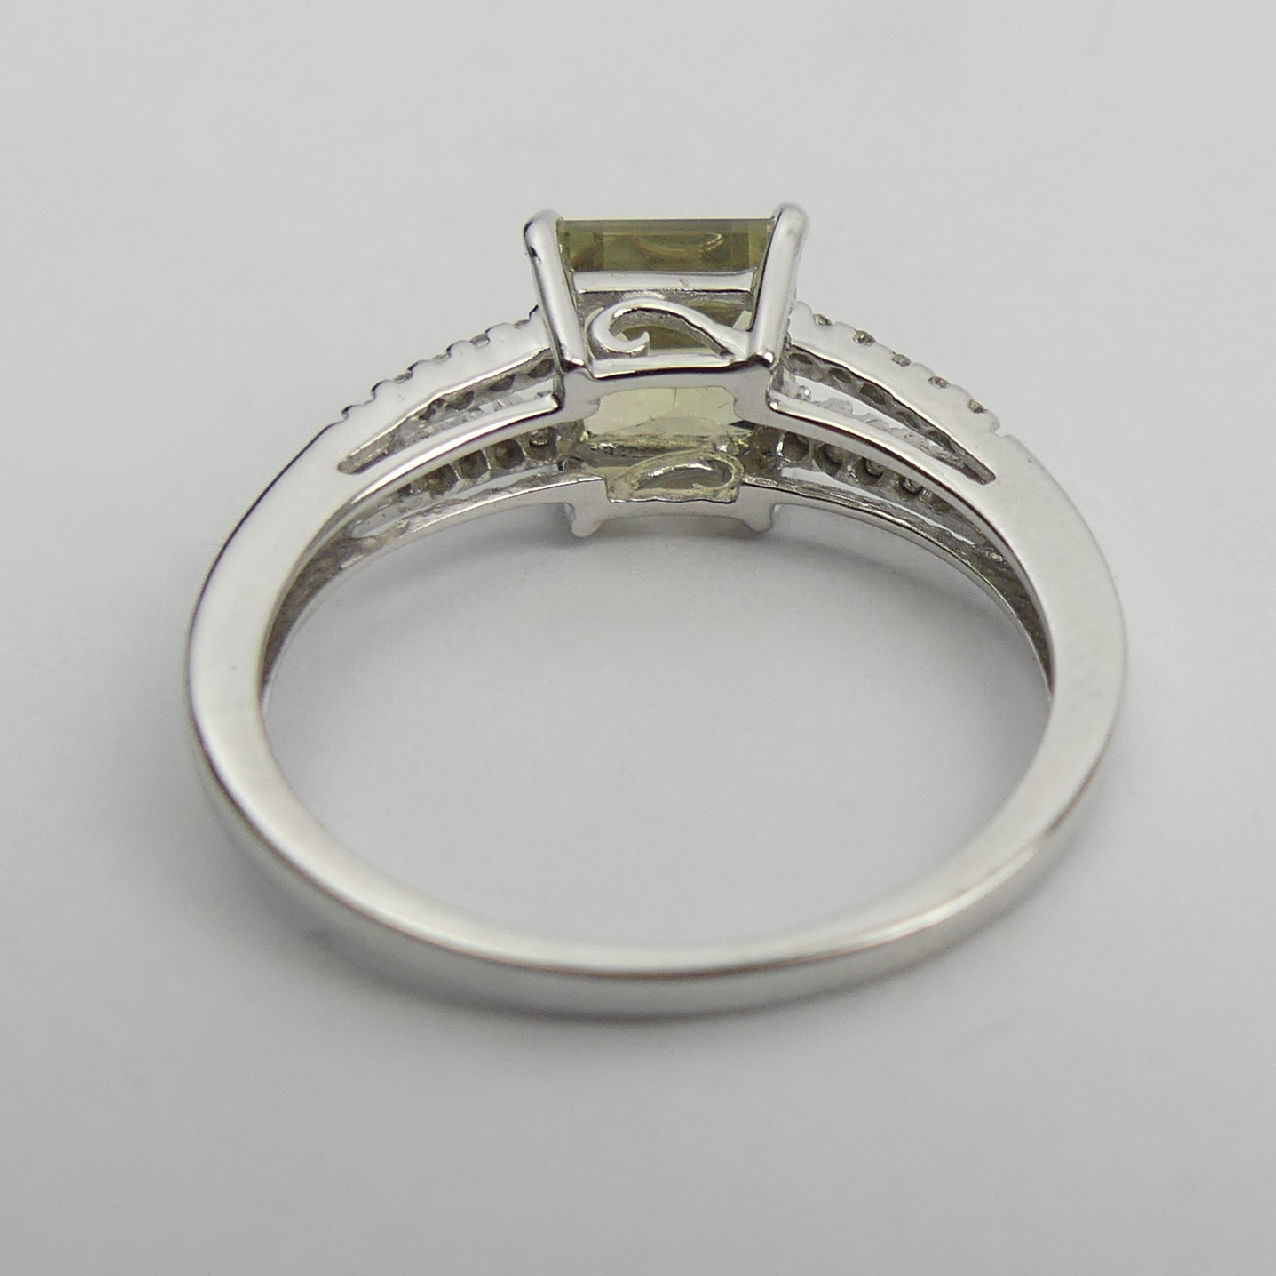 18ct white gold, square cut, zultanite and diamond ring, 2.8grams, 7.3mm, Size N1/2. UK Postage £12. - Image 4 of 6